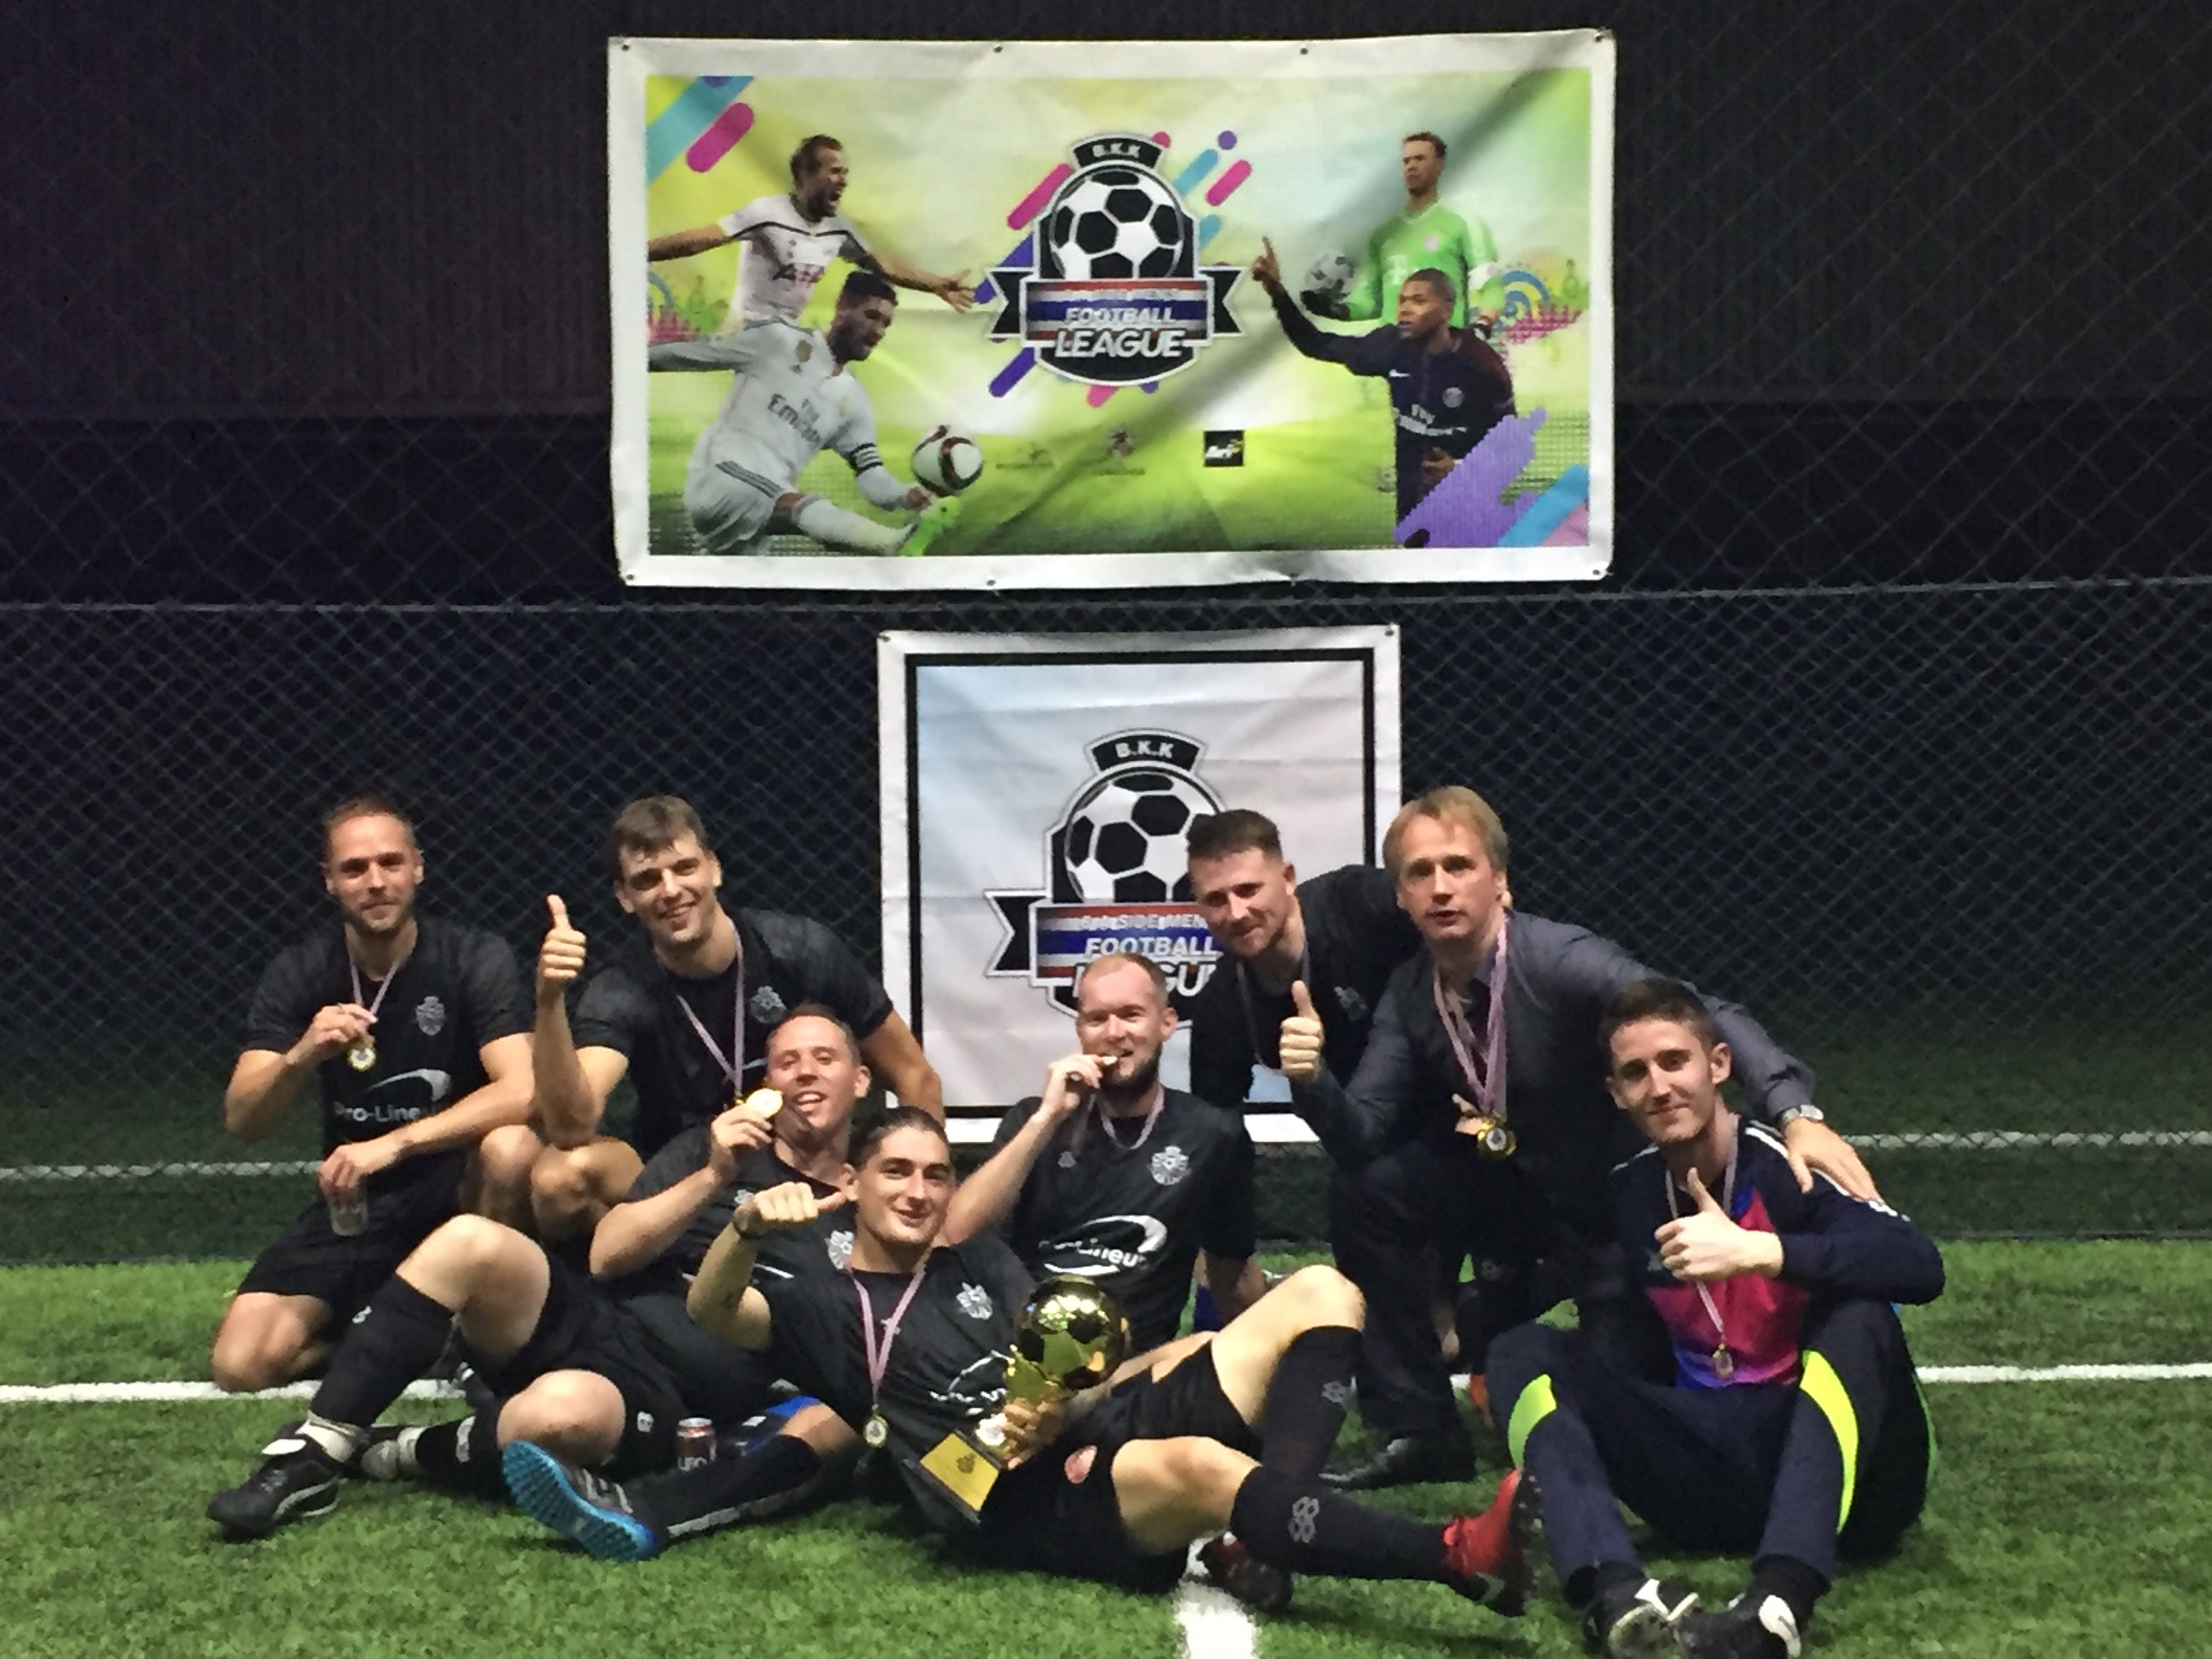 Pro-Lineup FC crowned champions